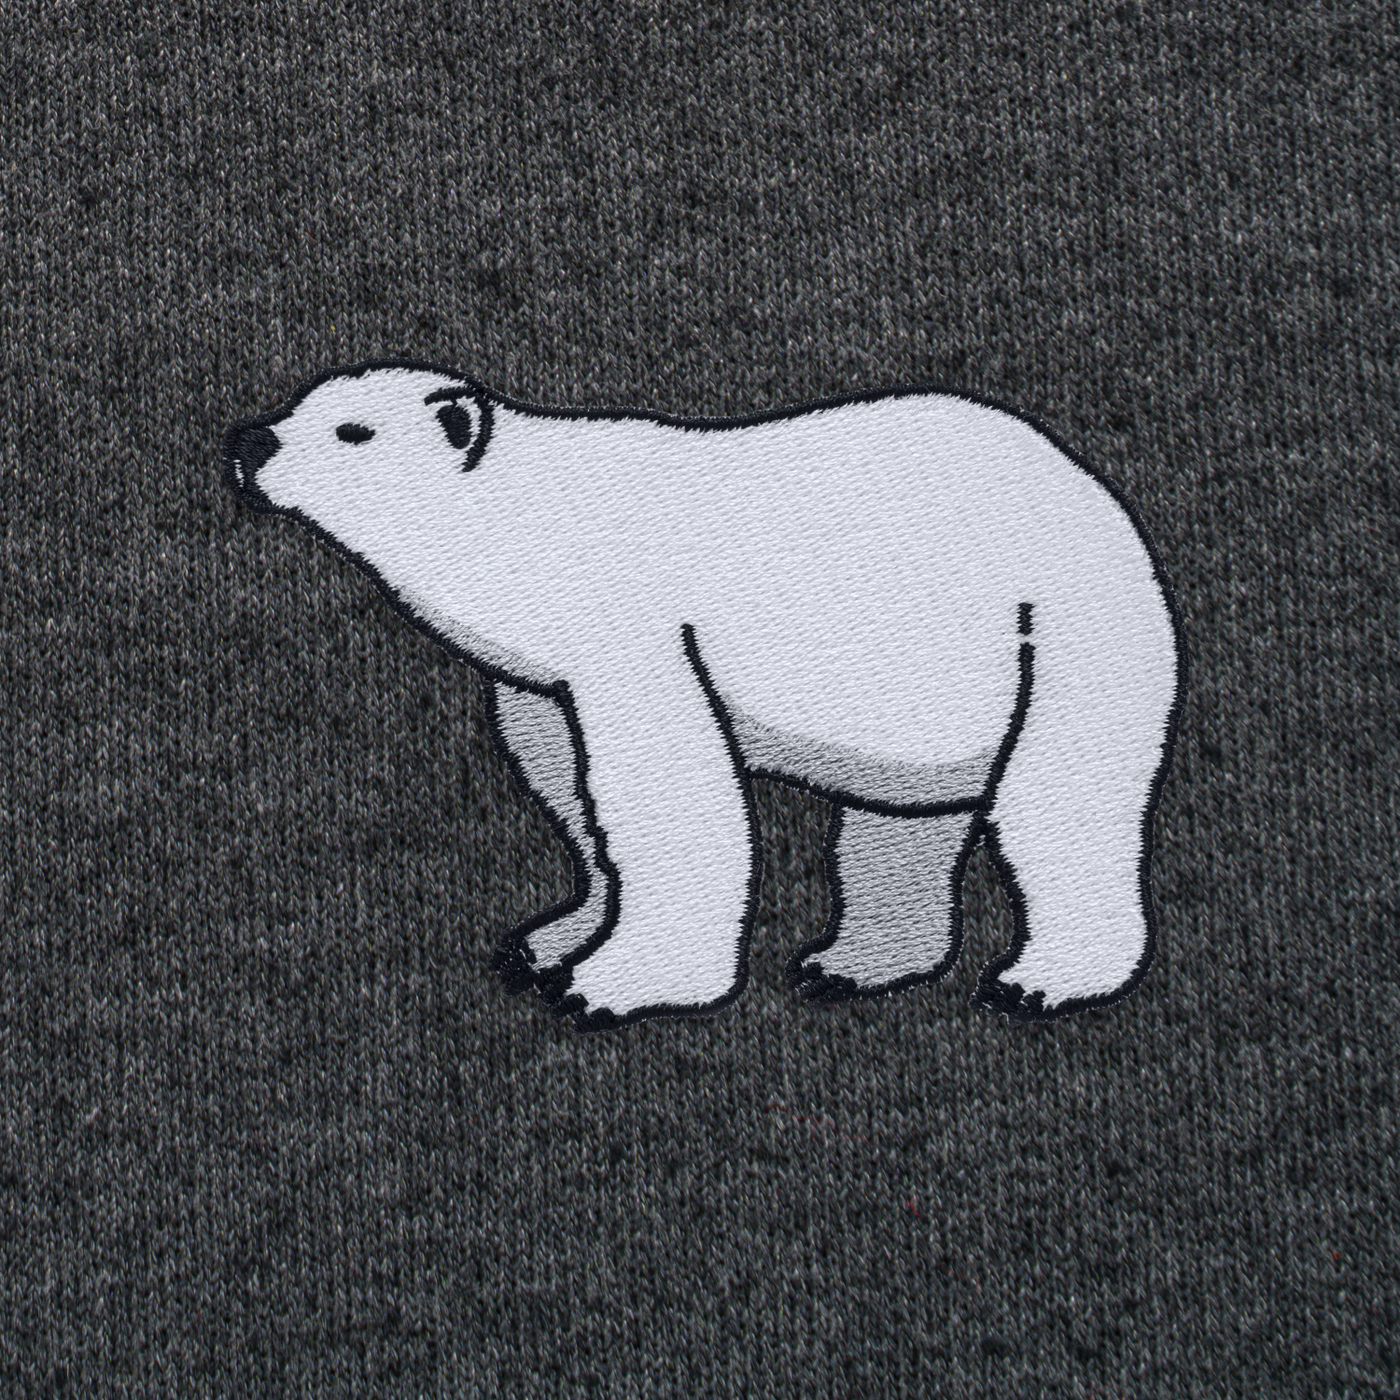 Bobby's Planet Men's Embroidered Polar Bear Hoodie from Arctic Polar Animals Collection in Dark Grey Heather Color#color_dark-grey-heather